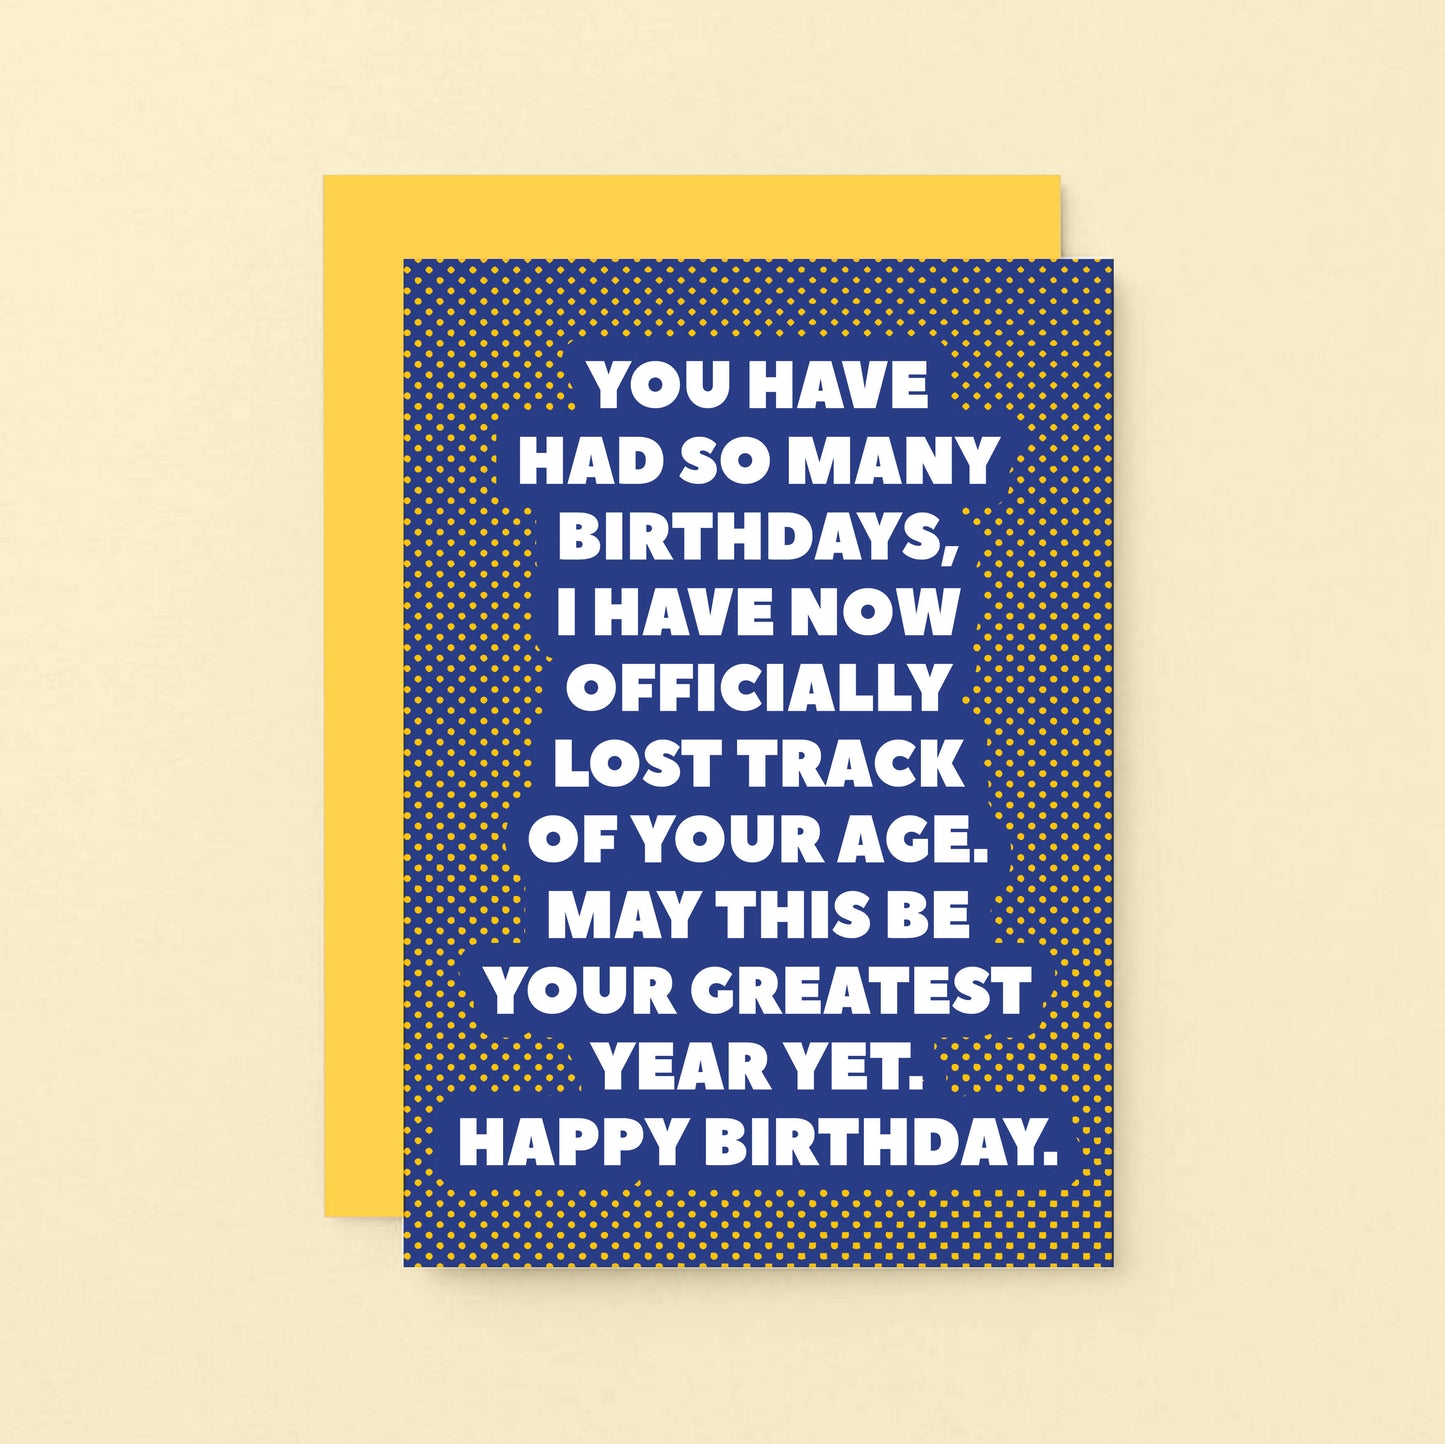 Birthday Card by SixElevenCreations. Reads You have had so many birthdays, I have now officially lost track of your age. May this be your greatest year yet. Happy birthday. Product Code SE2702A6